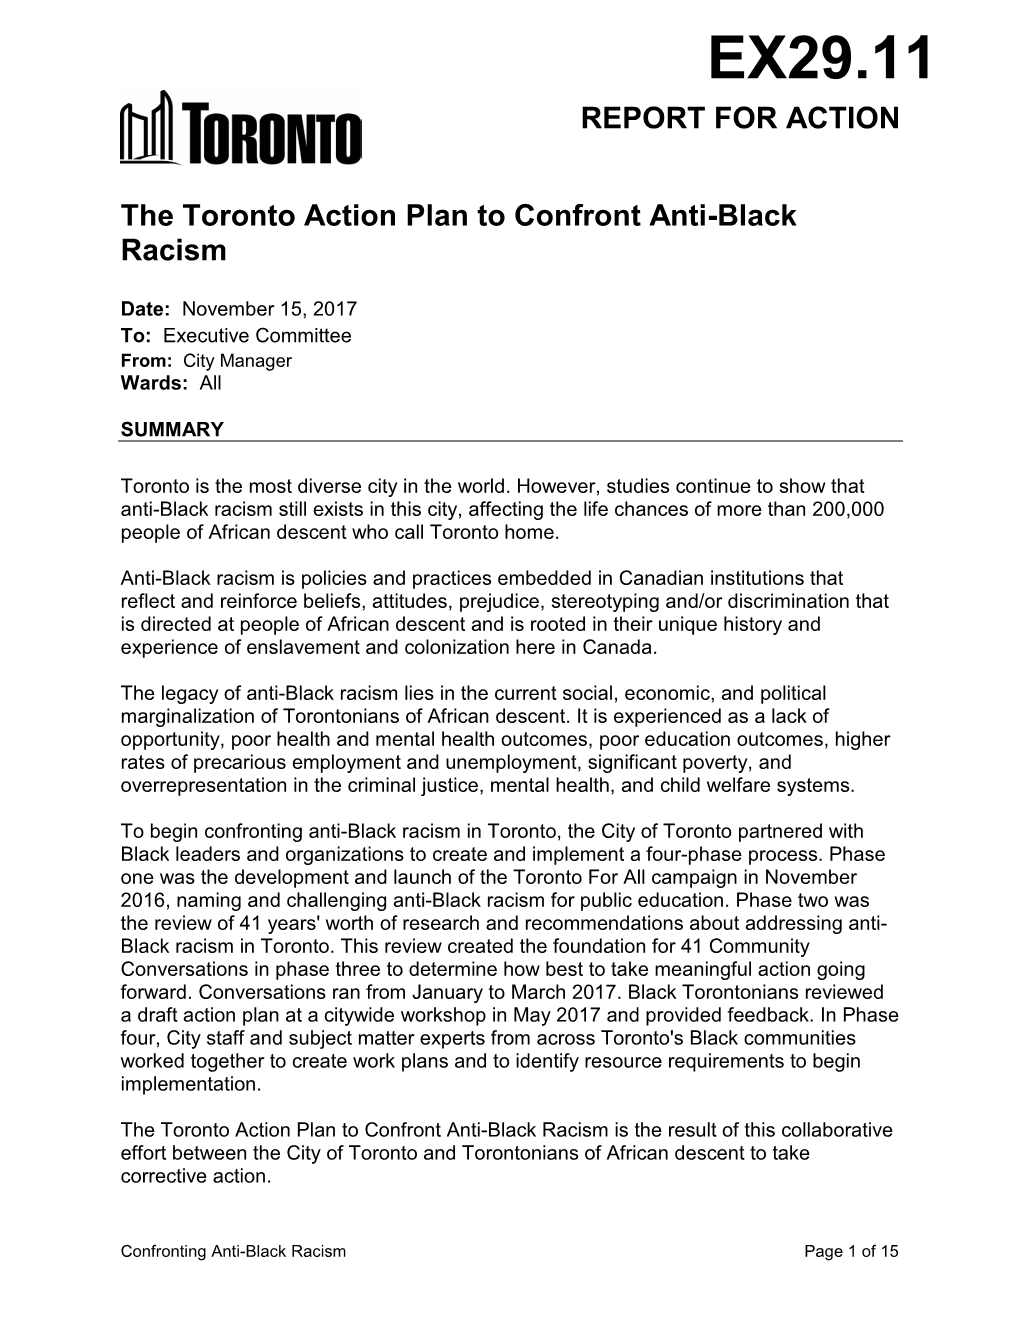 The Toronto Action Plan to Confront Anti-Black Racism